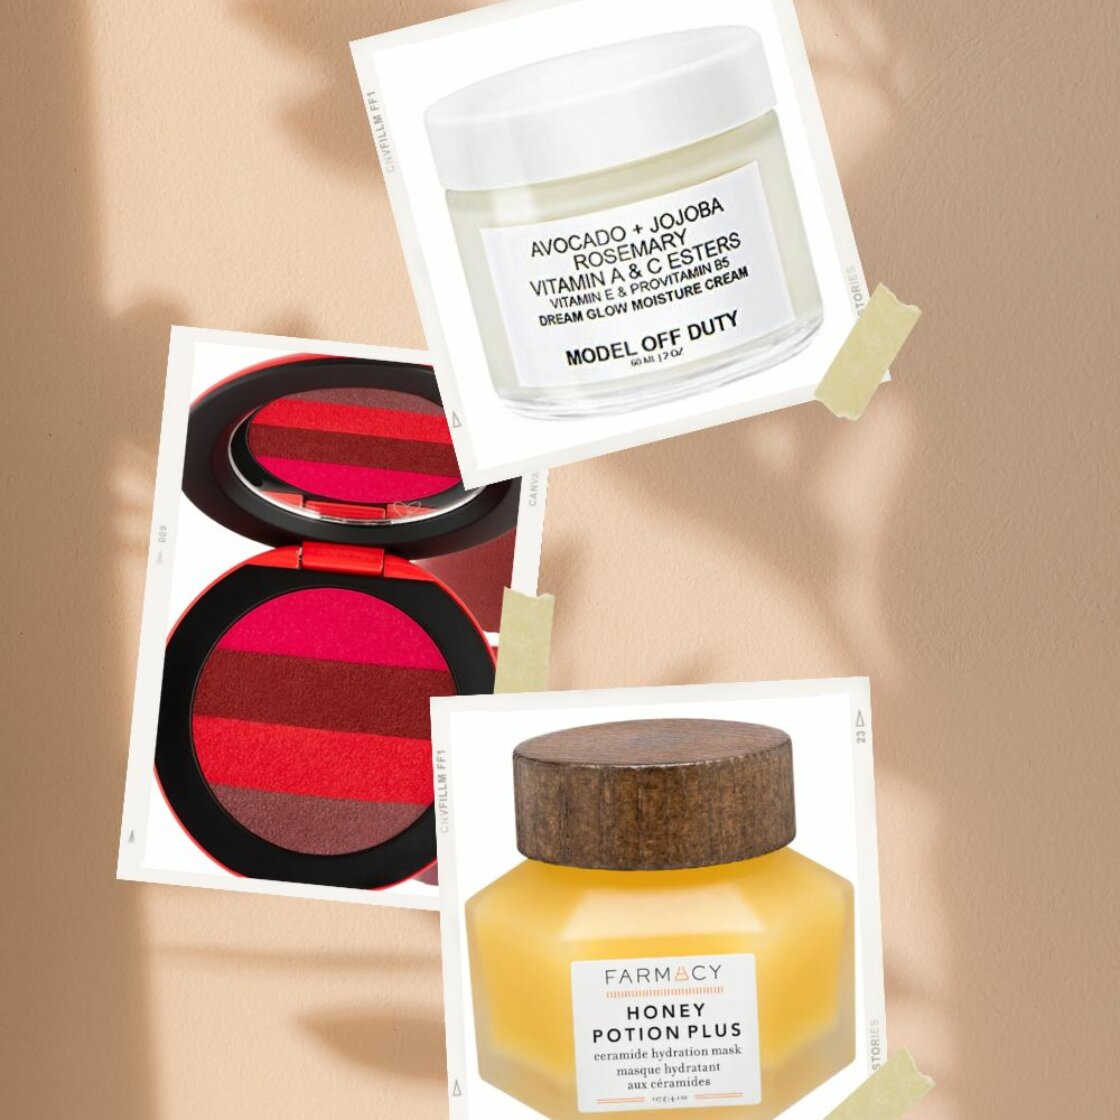 5 Sustainability-Focused Beauty Brands That Are Must-Haves